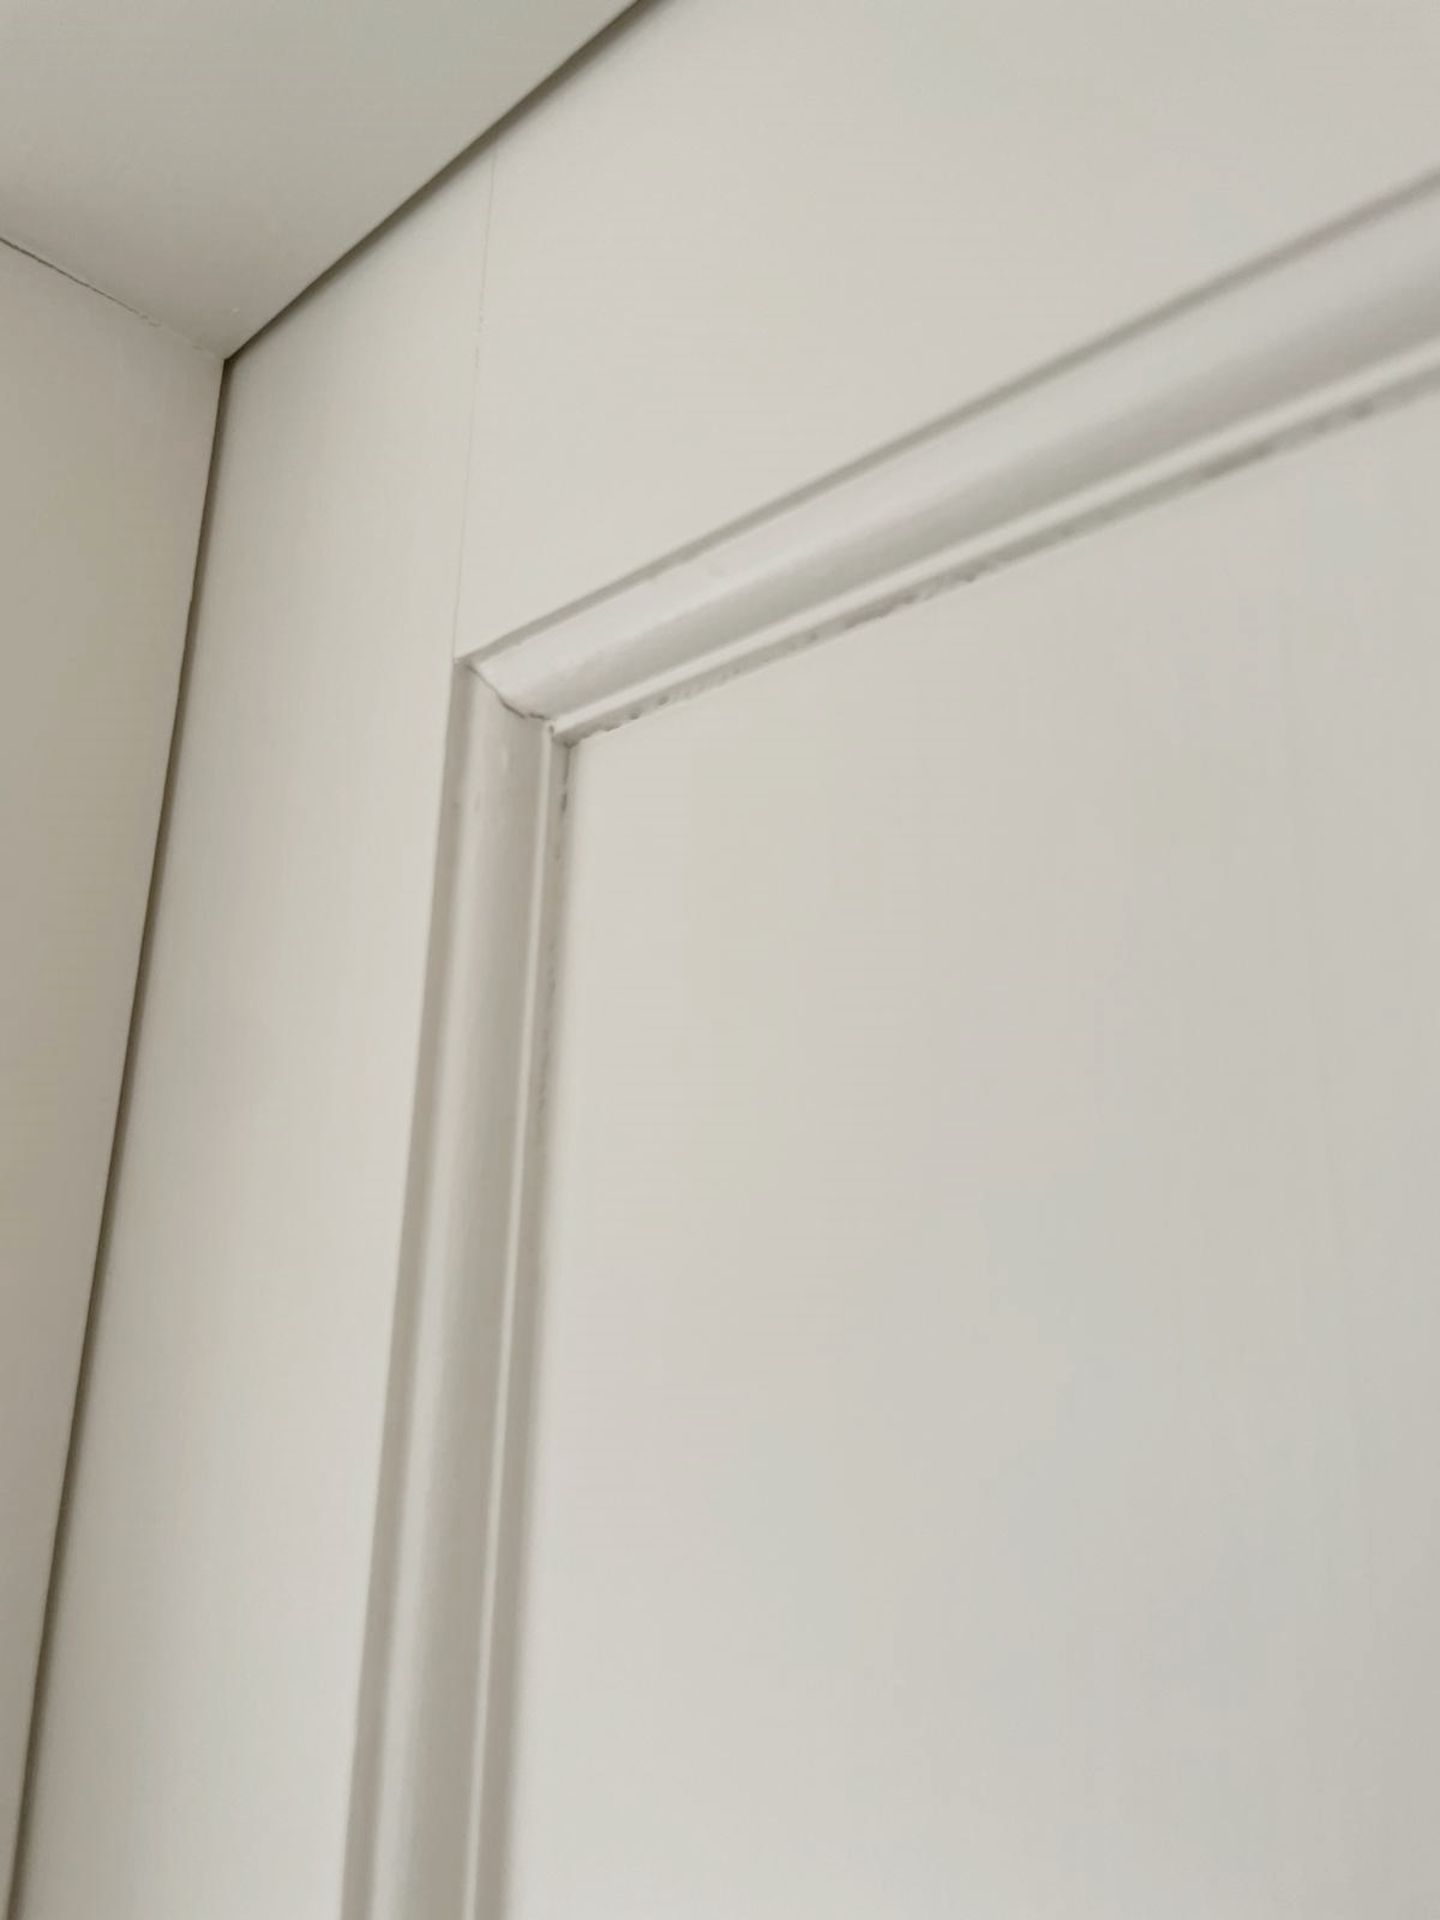 1 x Solid Wood Lockable Painted Internal Door in White - Includes Handles and Hinges - Image 7 of 10